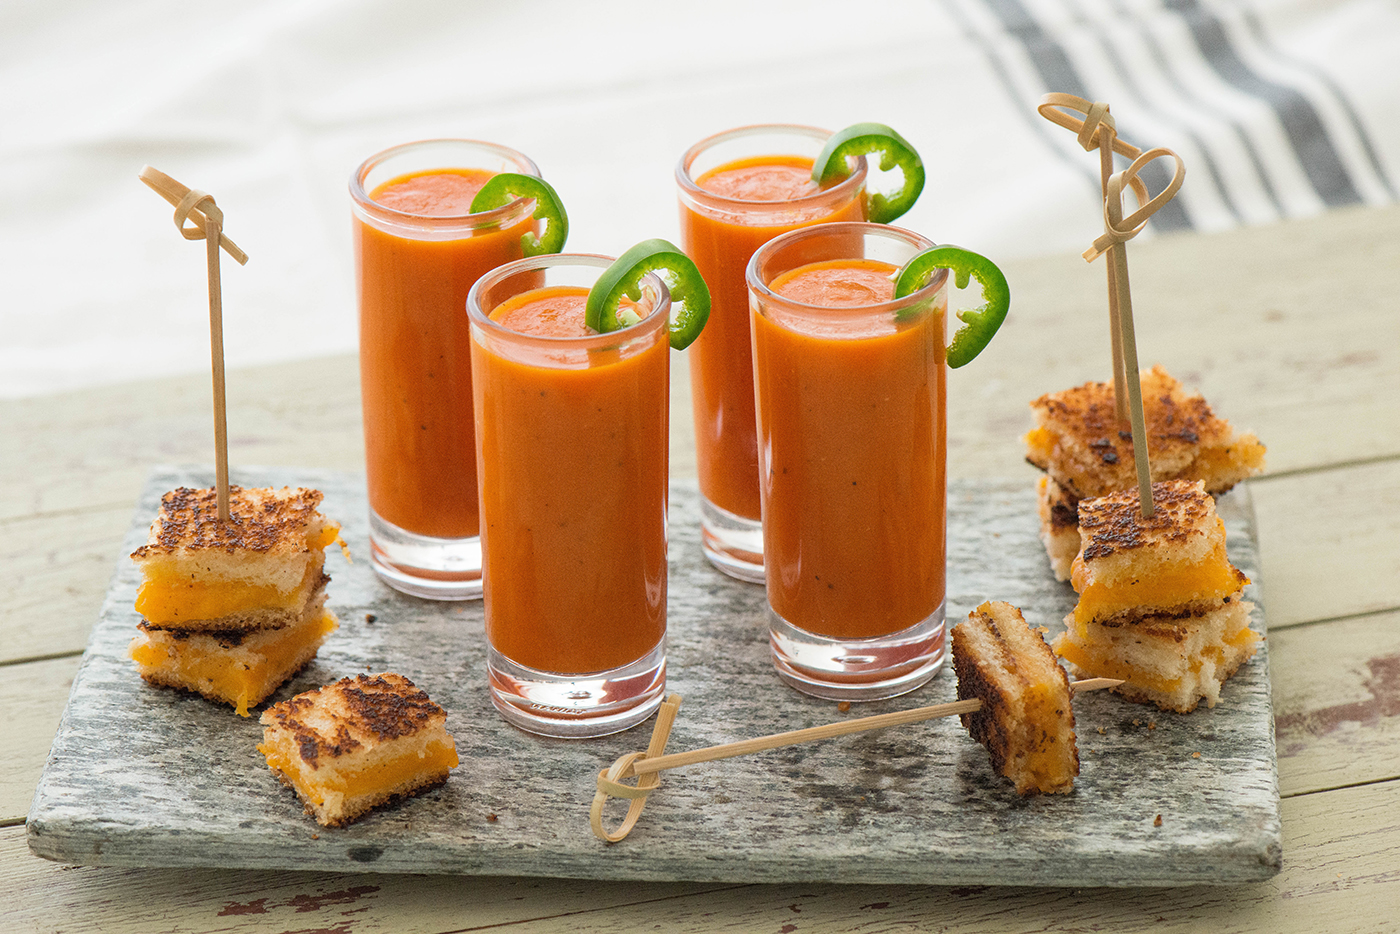 Spicy Tomato Soup with Grilled Cheese Croutons